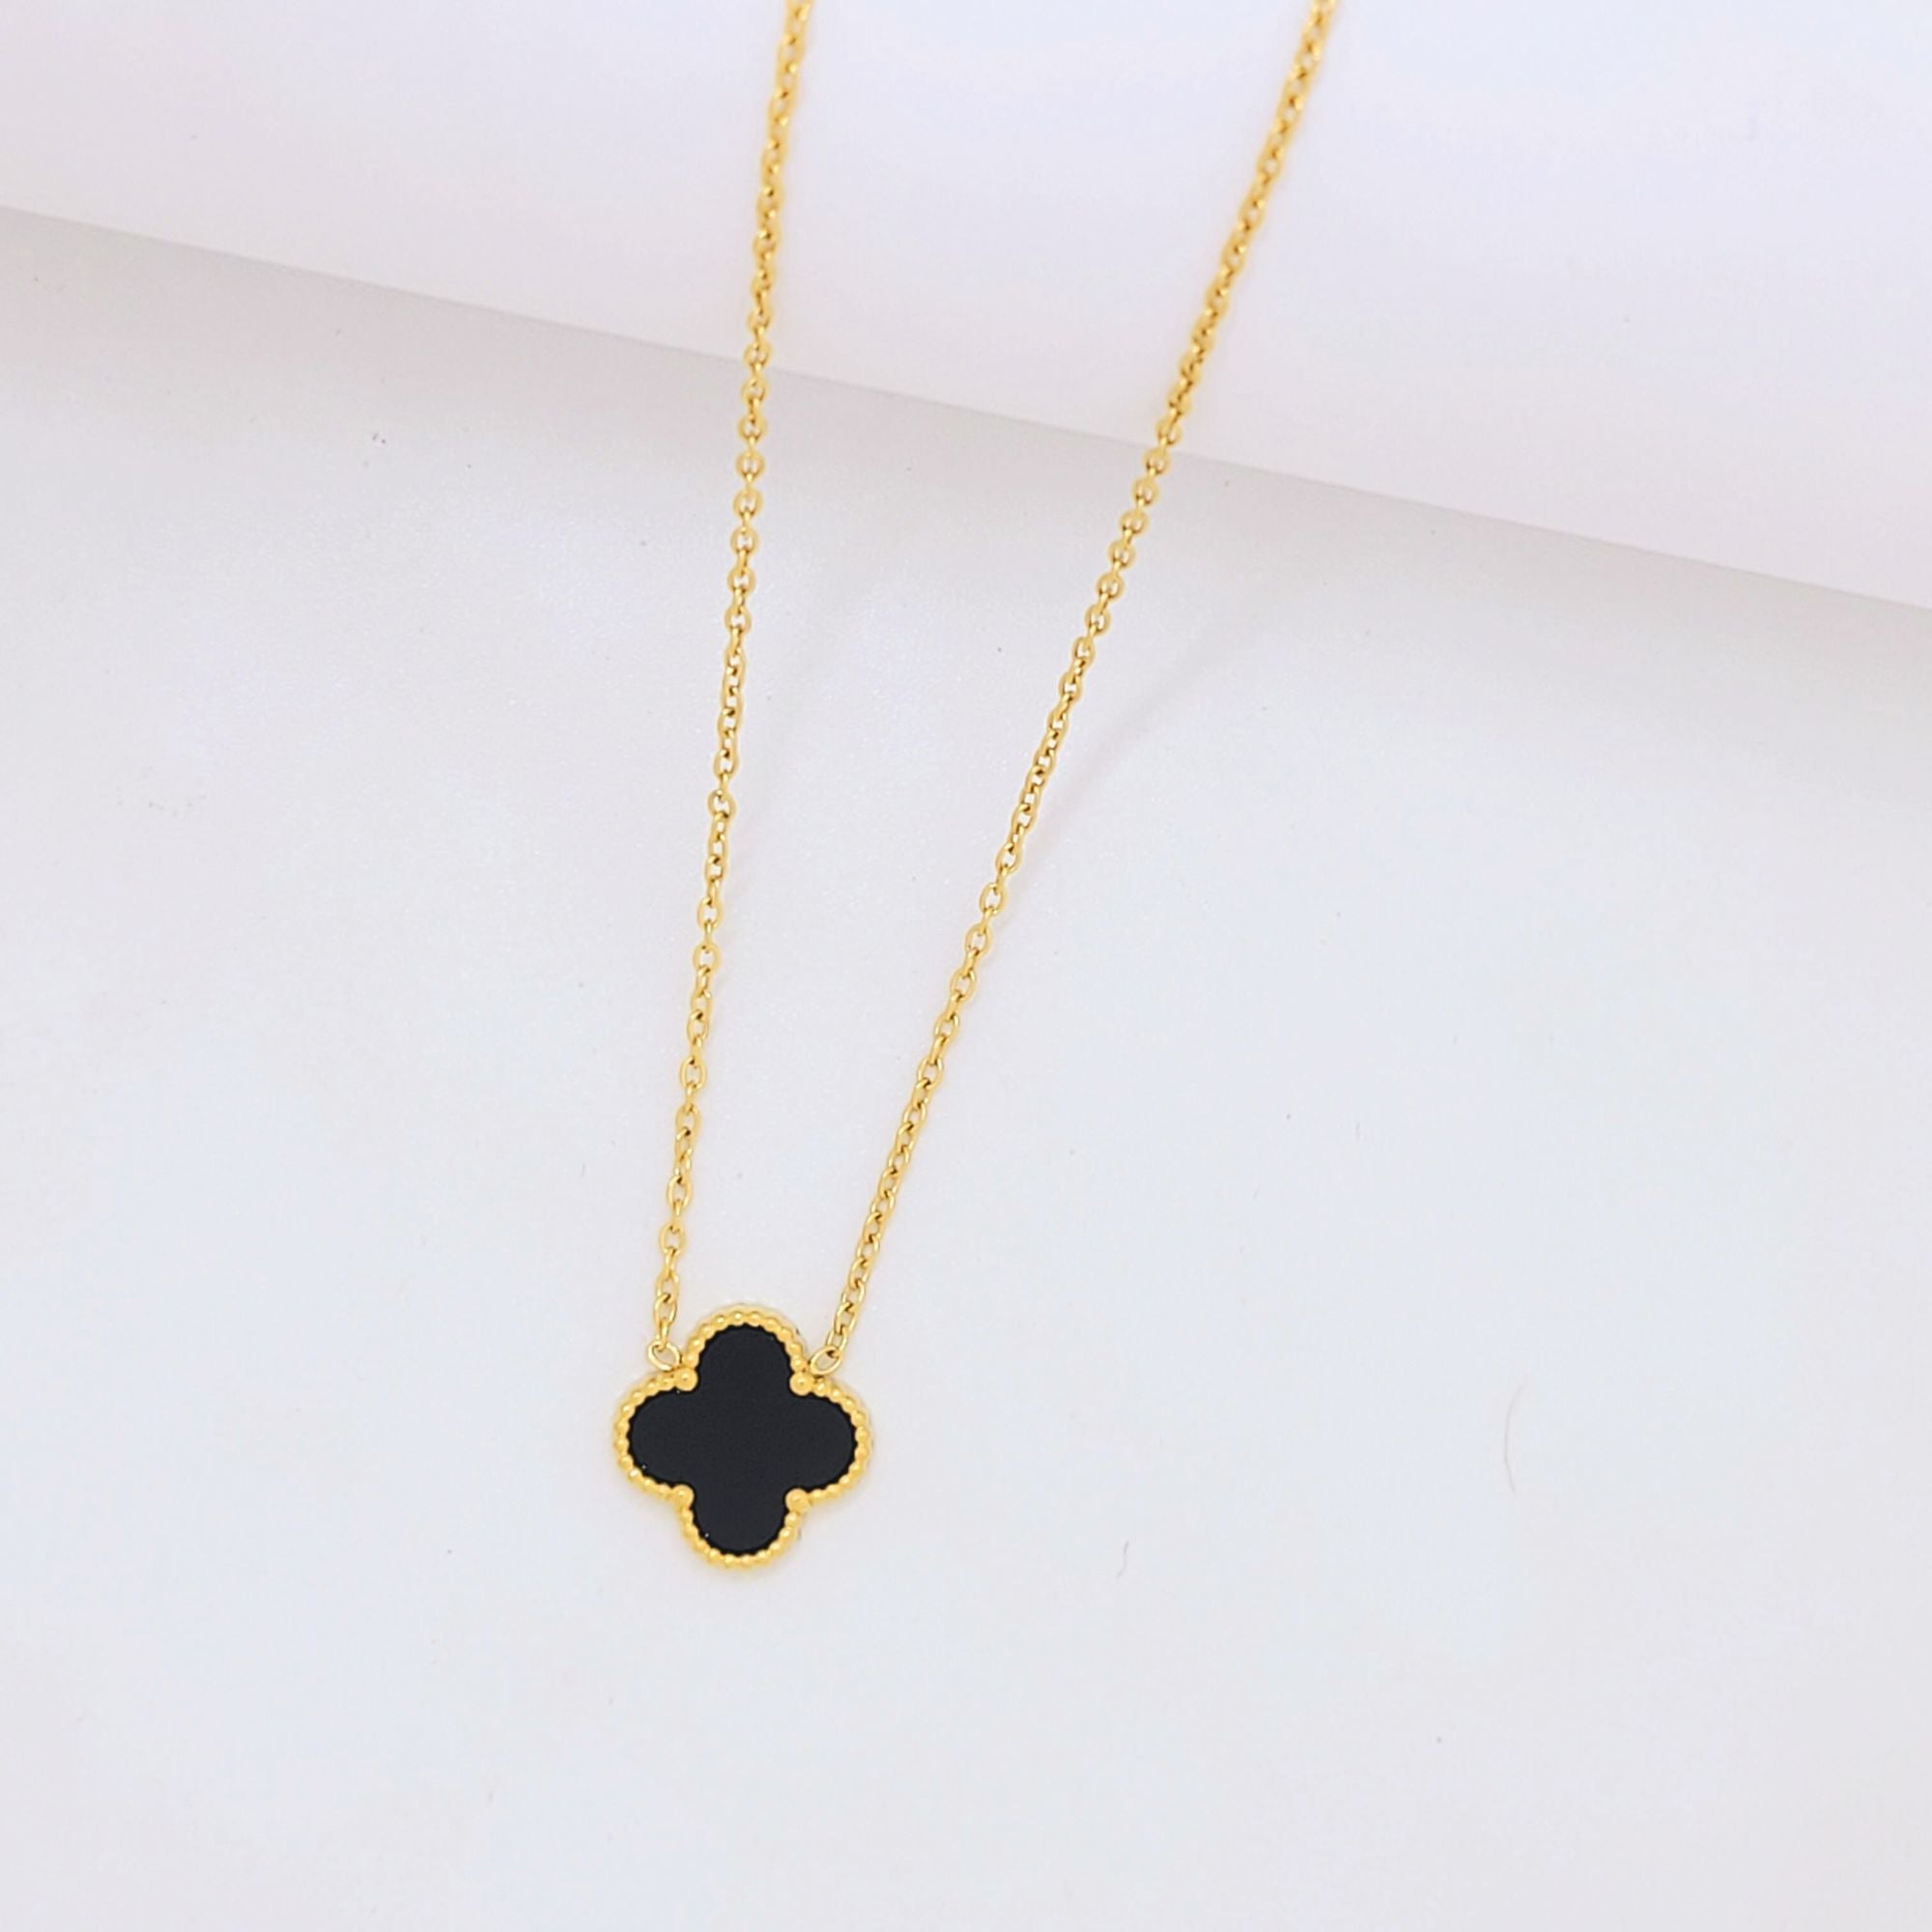 Clover charm necklace